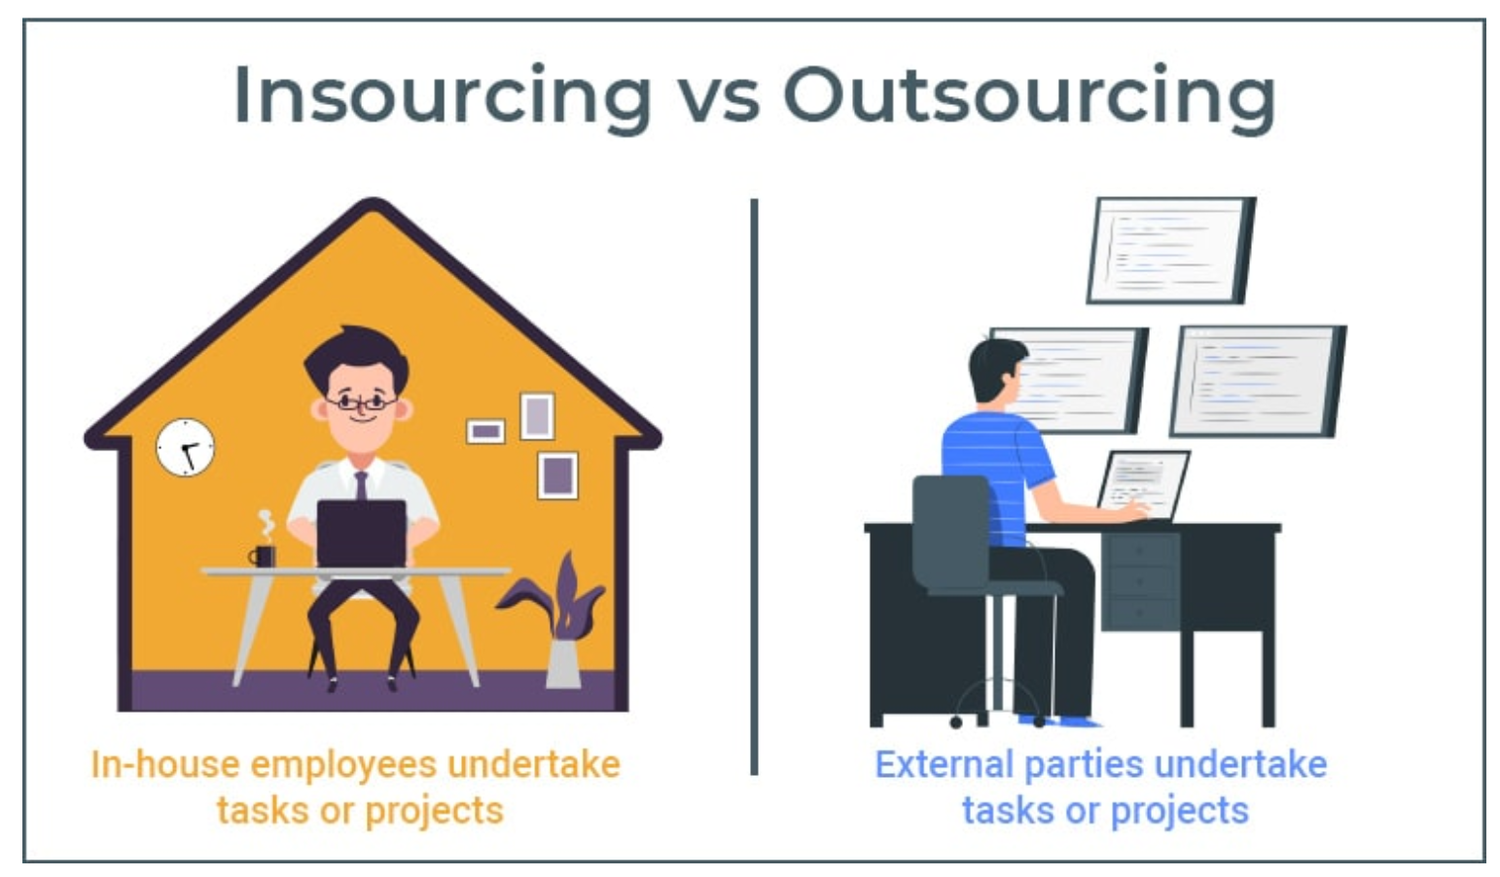 Insourcing vs. Outsourcing for Operational Excellence